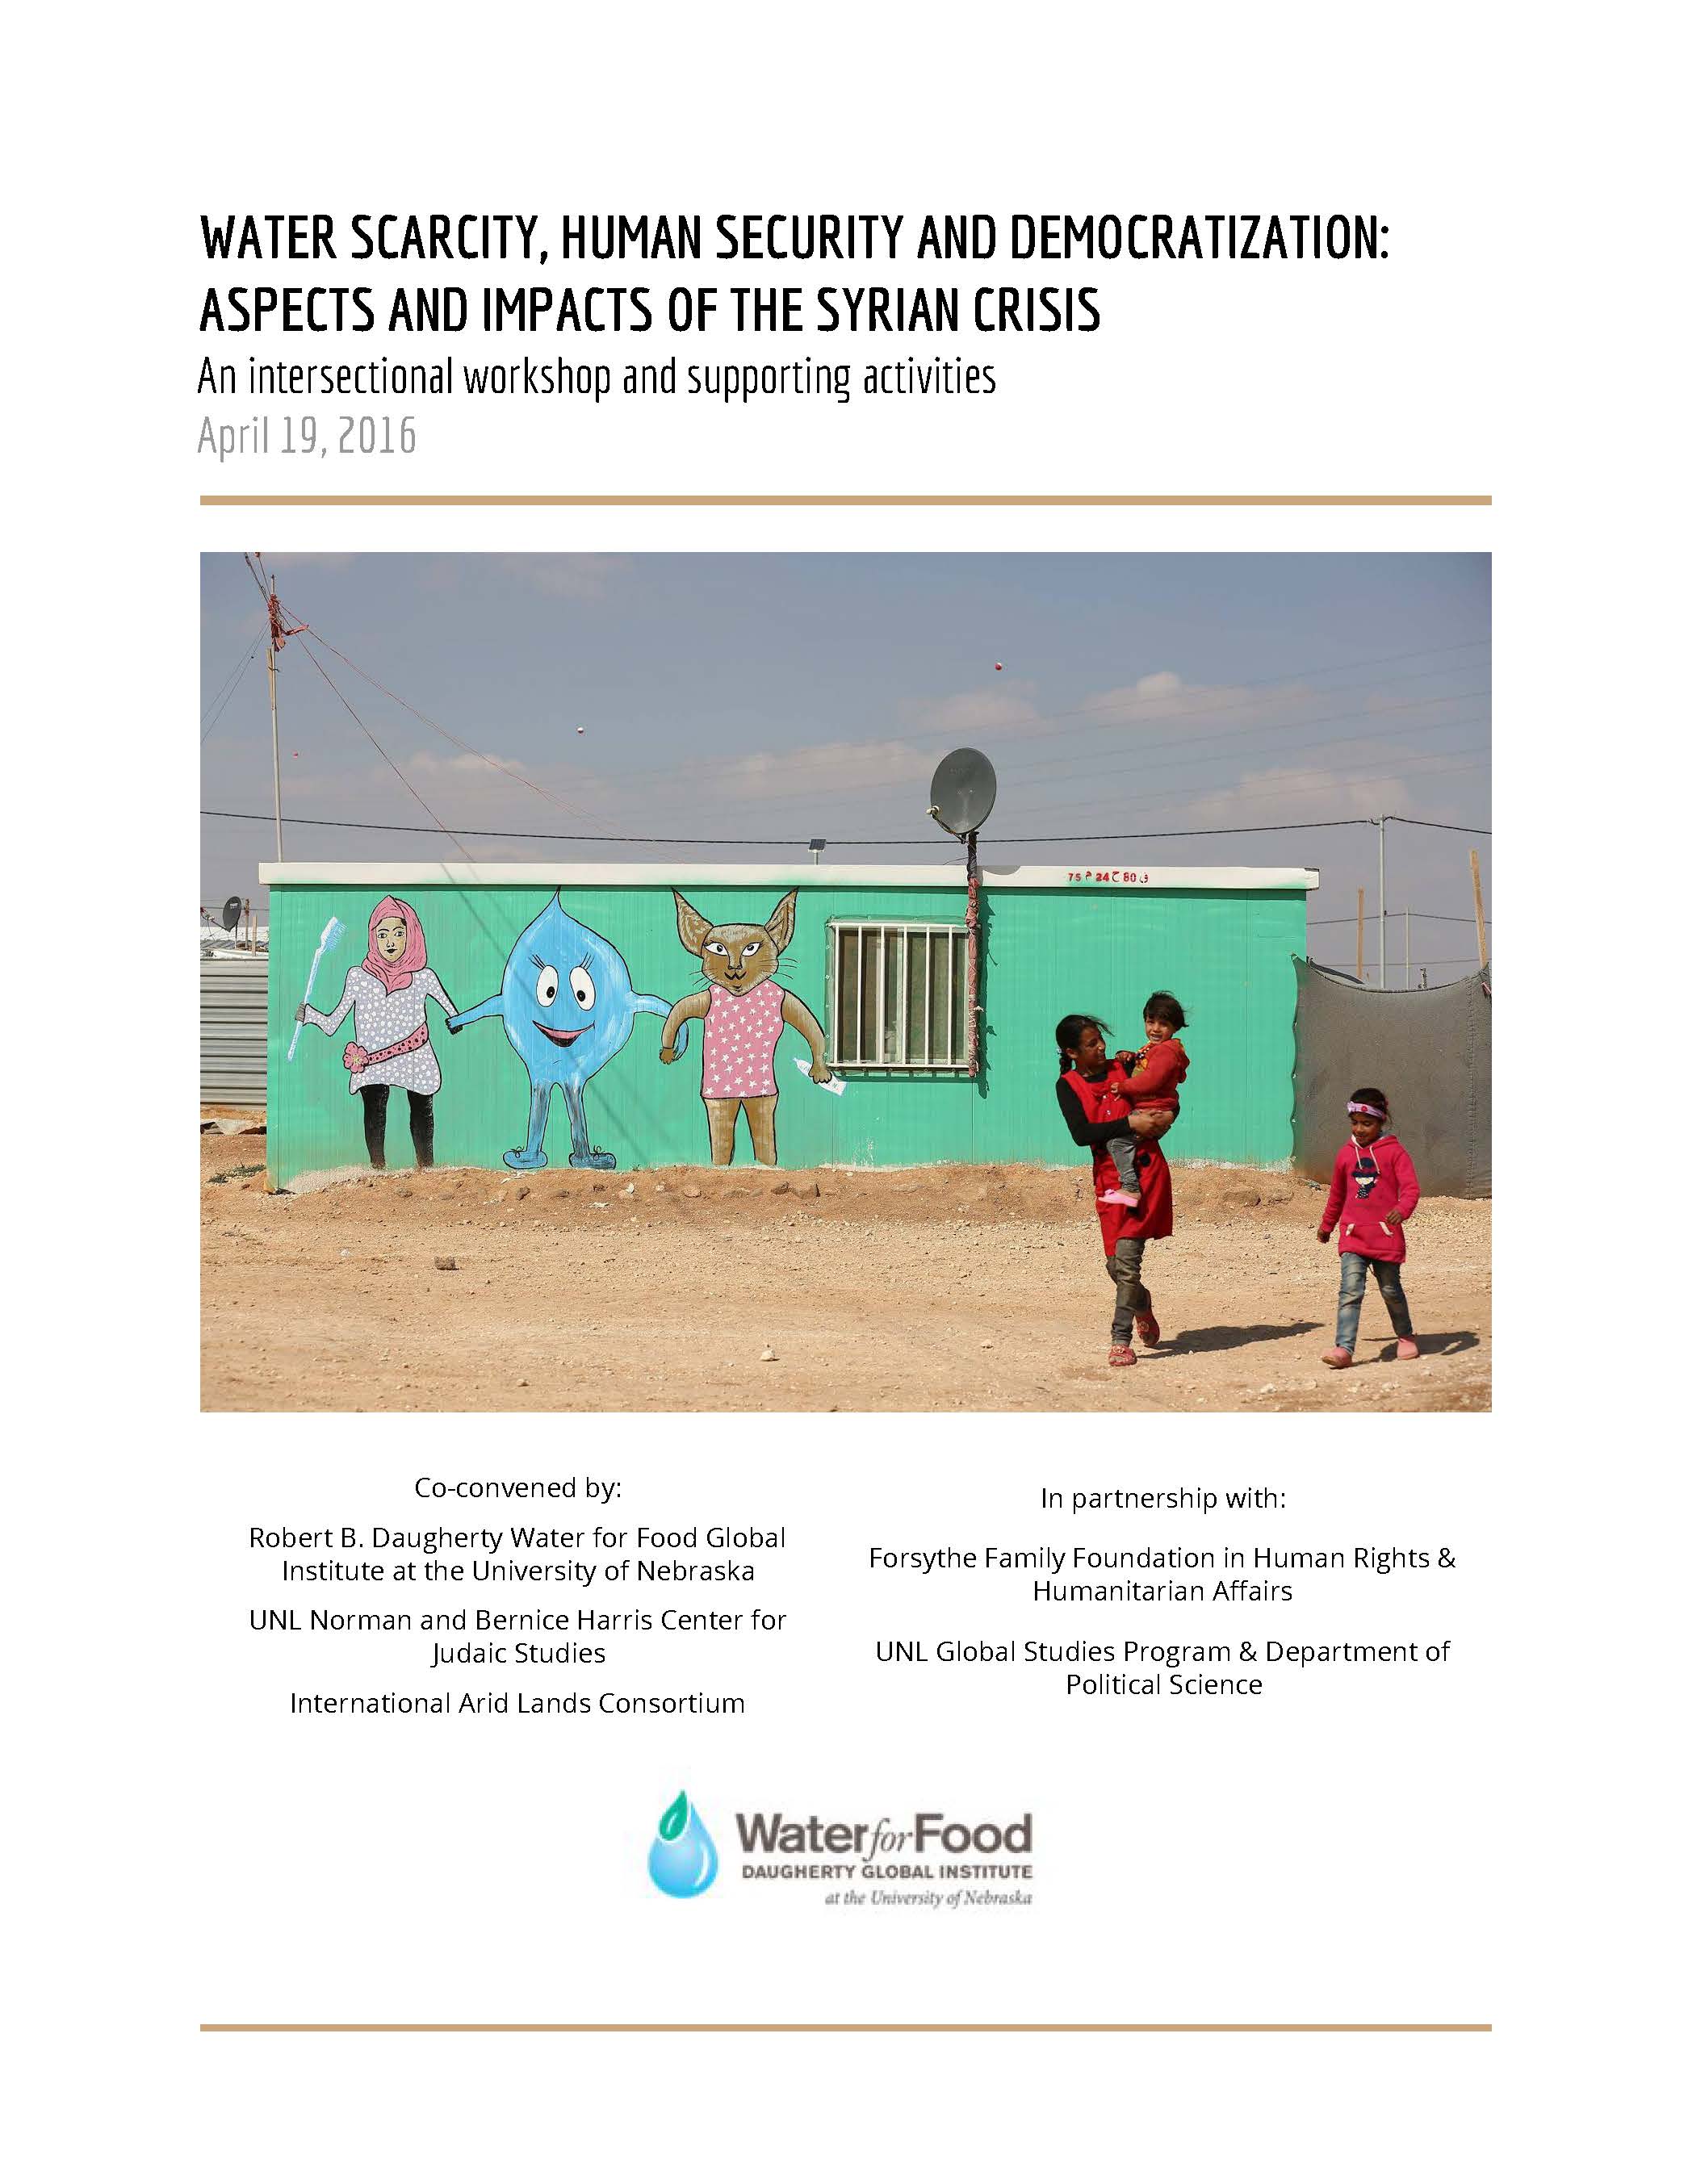 Harris Center was a major co-sponsor of a symposium on water security and the Syrian refugee crisis